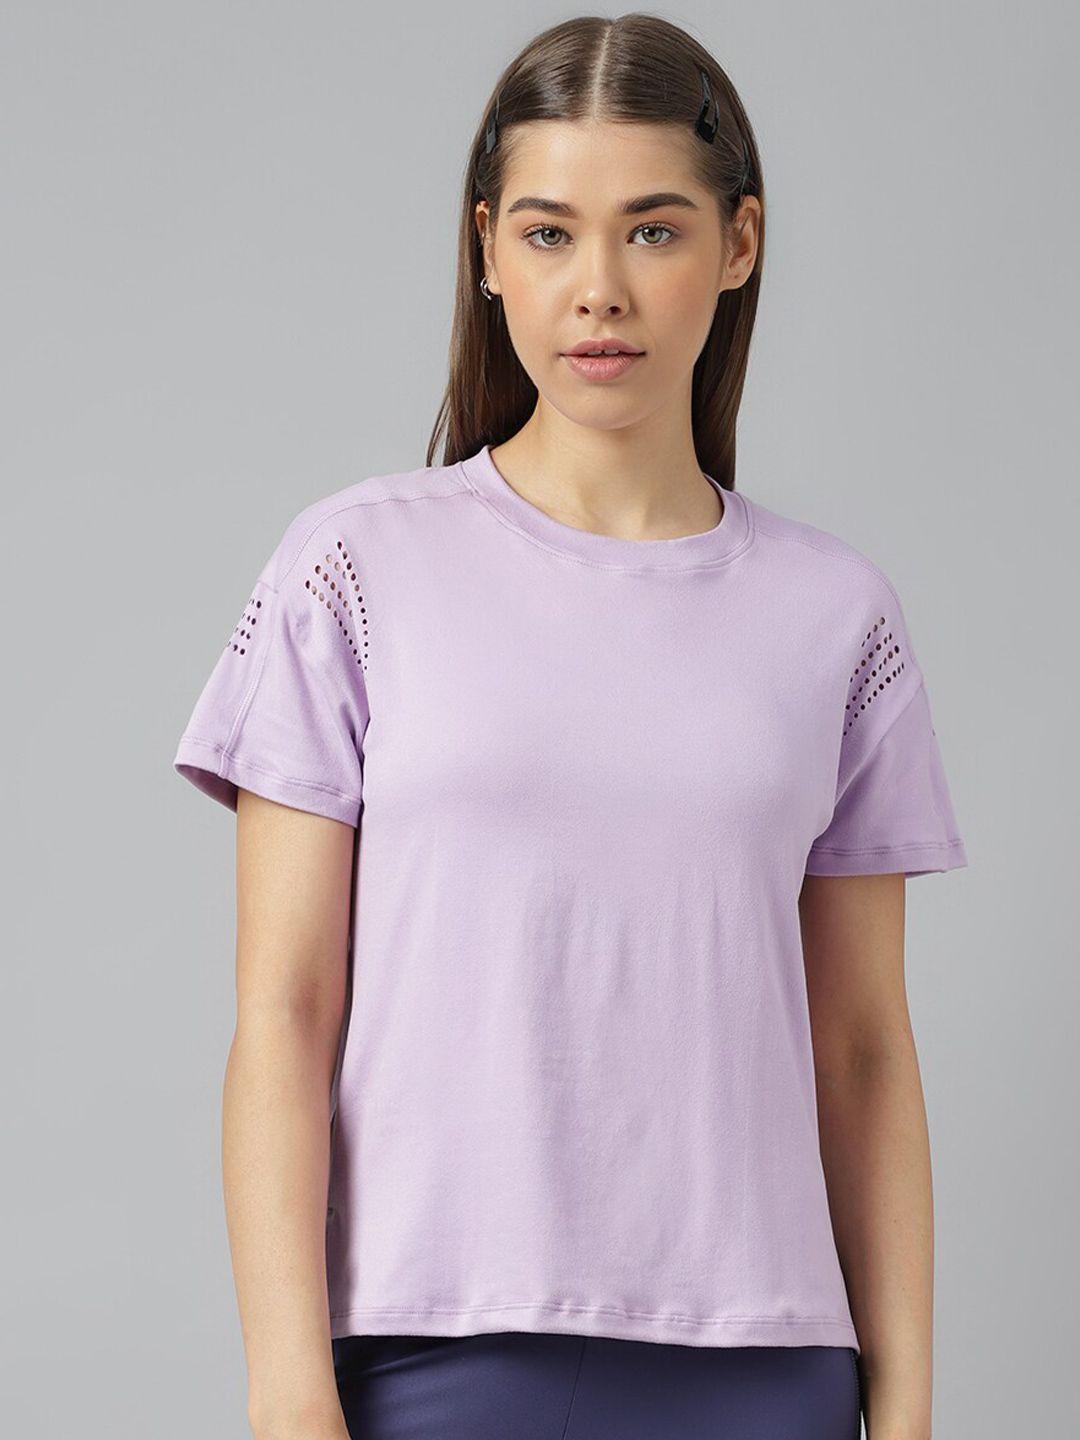 fitkin  anti odour extended sleeves cut-outs relaxed fit sports t-shirt